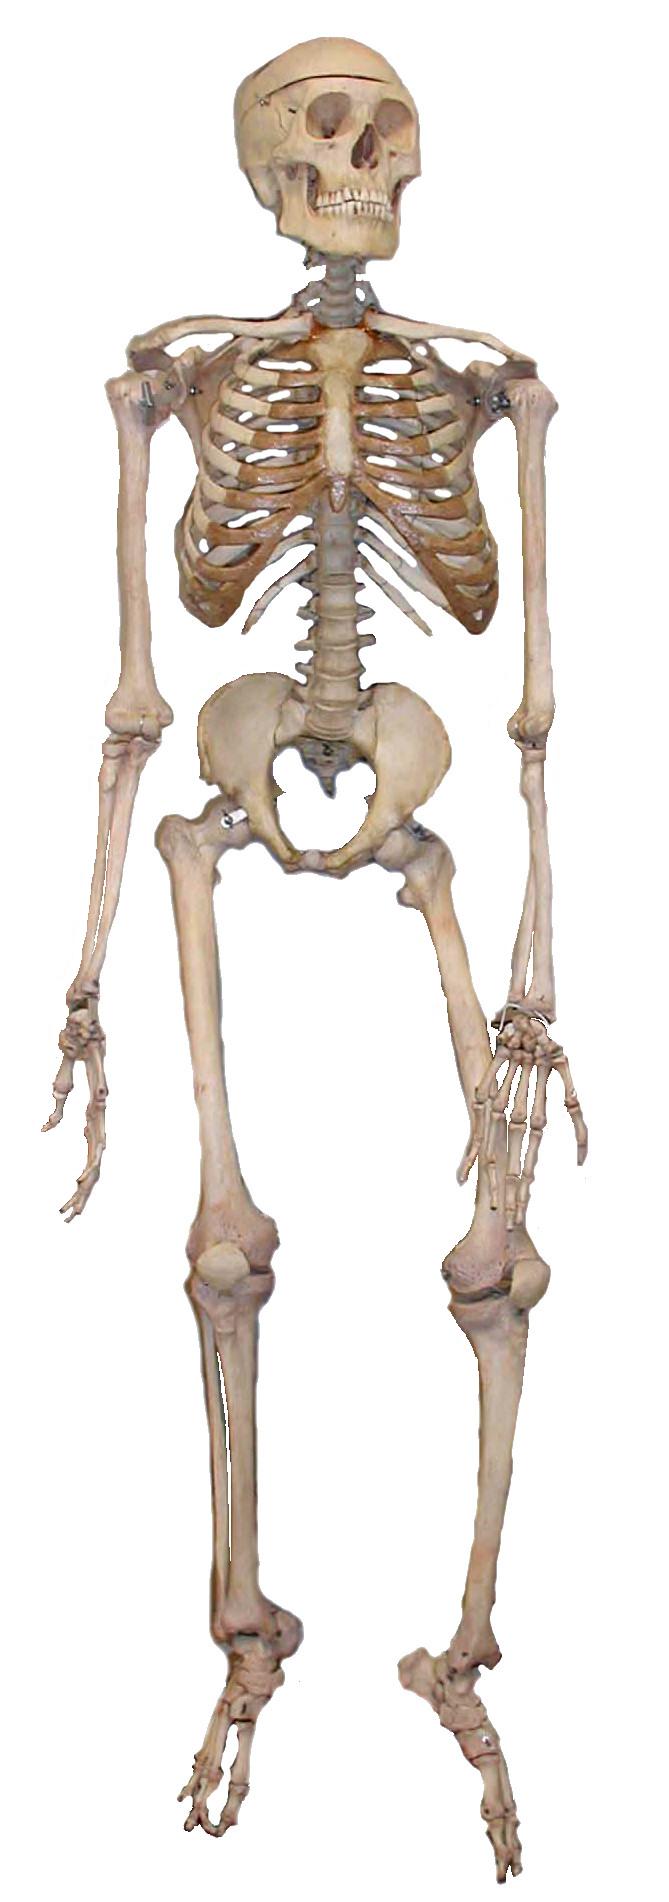 An articulated human skeleton, as used in biology education